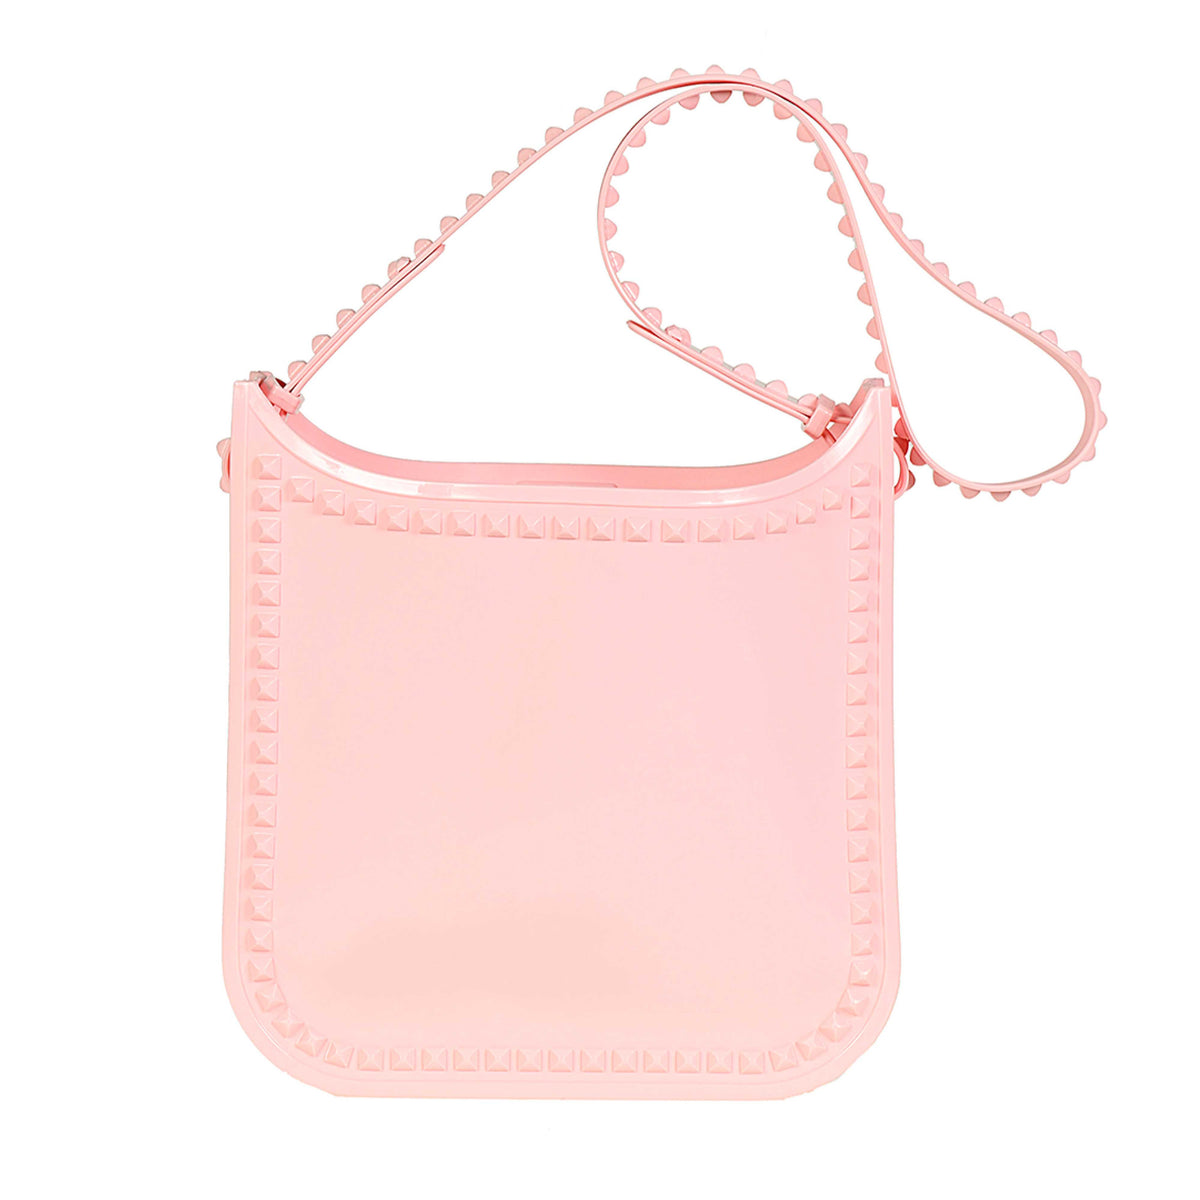 Large jelly beach bags from Carmen Sol perfect for beach outfit